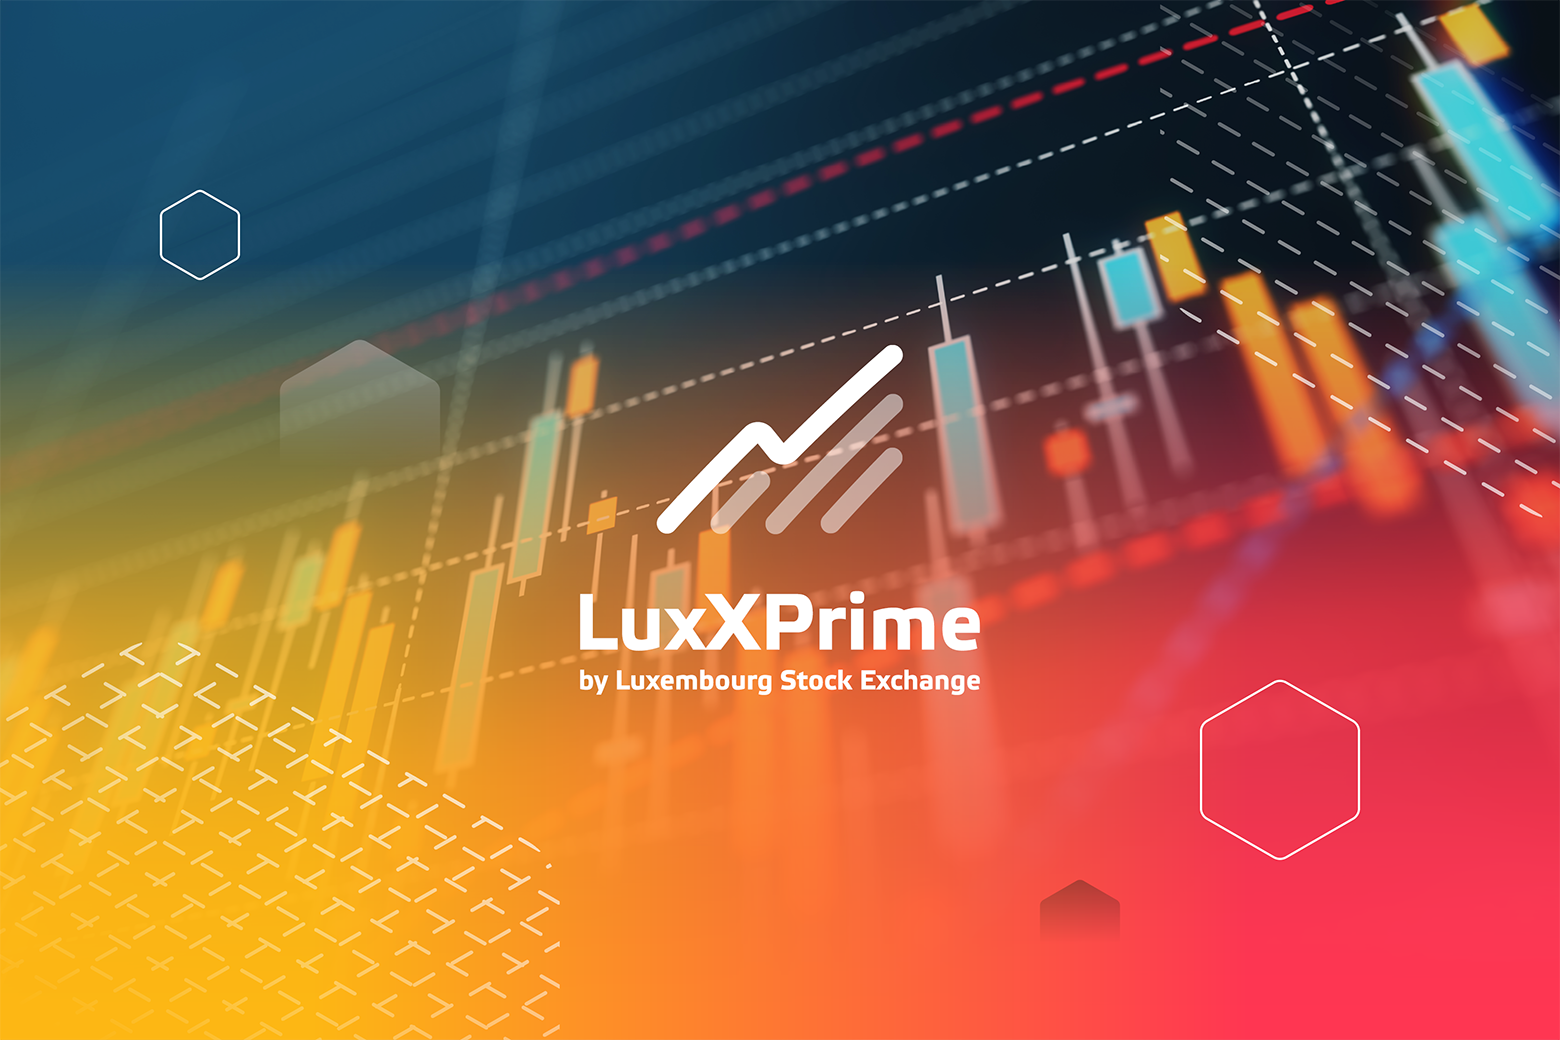 LuxXPrime - the home of retail-size bond trading